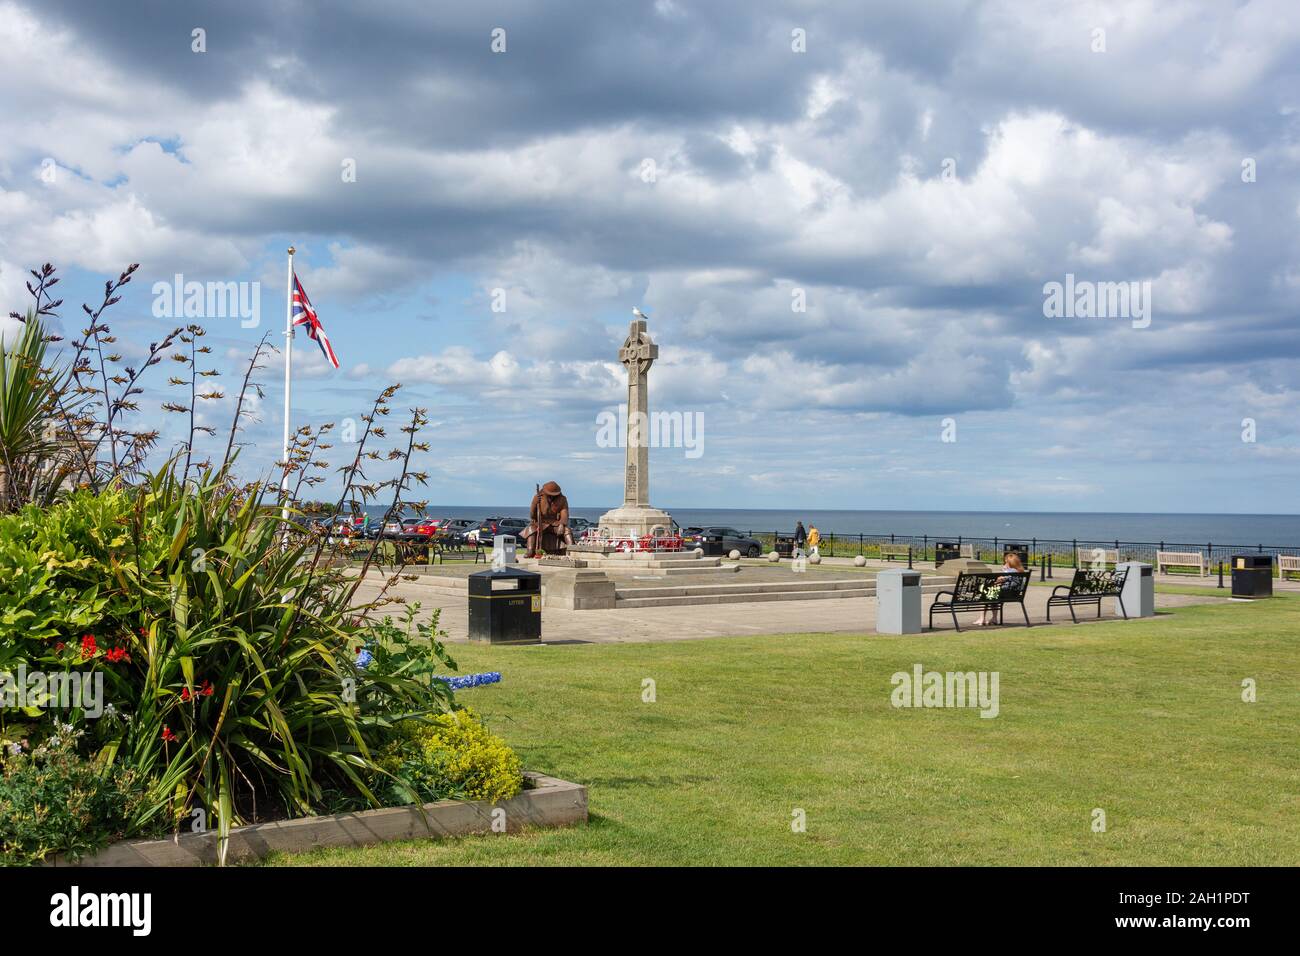 Union Jack flag, Tommy statue and war memorial on promenade, Seaham, County Durham, England, United Kingdom Stock Photo